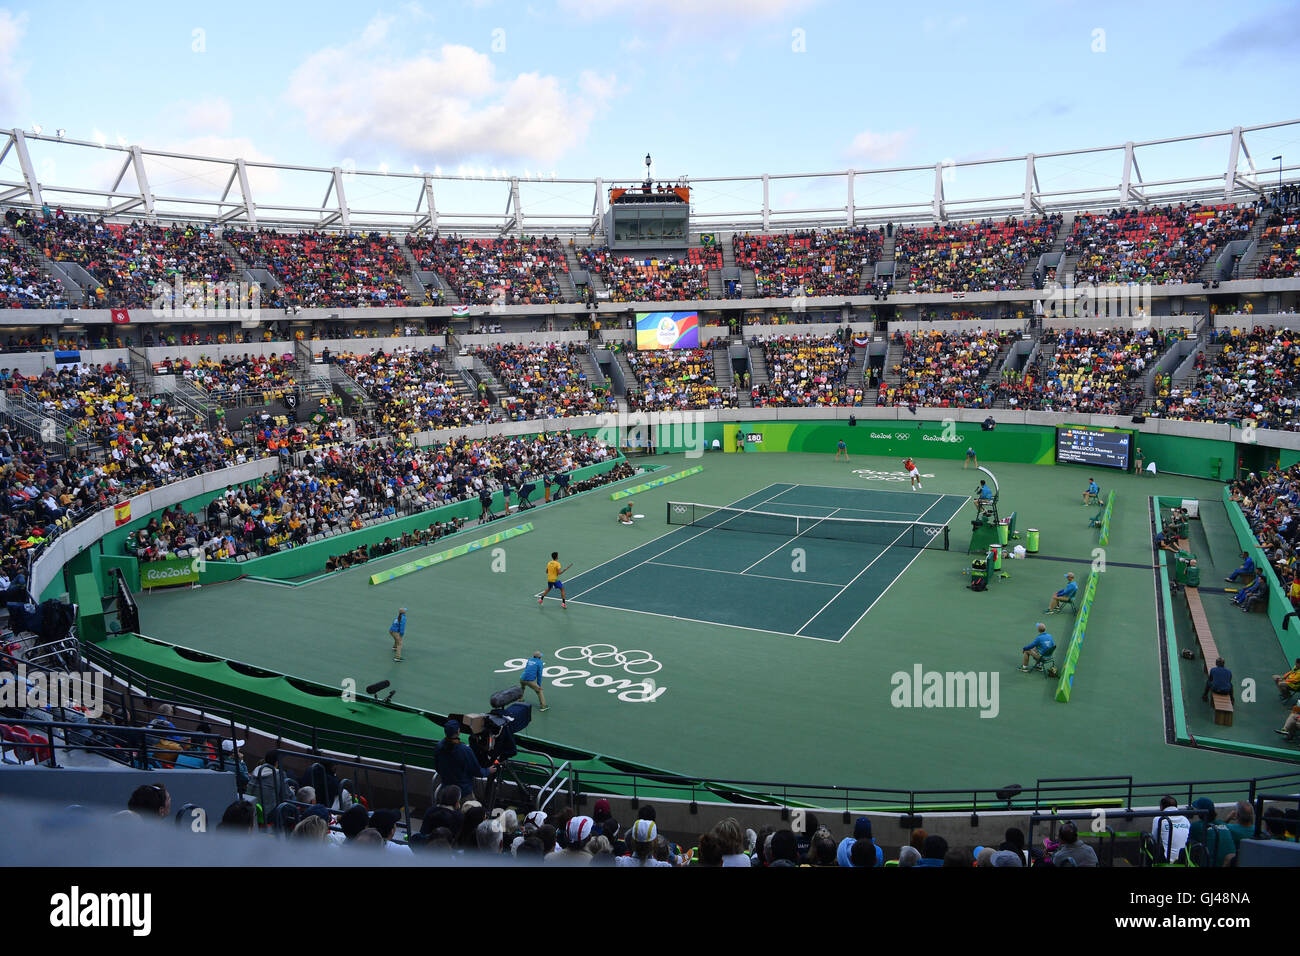 Rio de Janeiro, Brazil. 12th Aug, 2016. General view of the Olympic Tennis  Centre during the